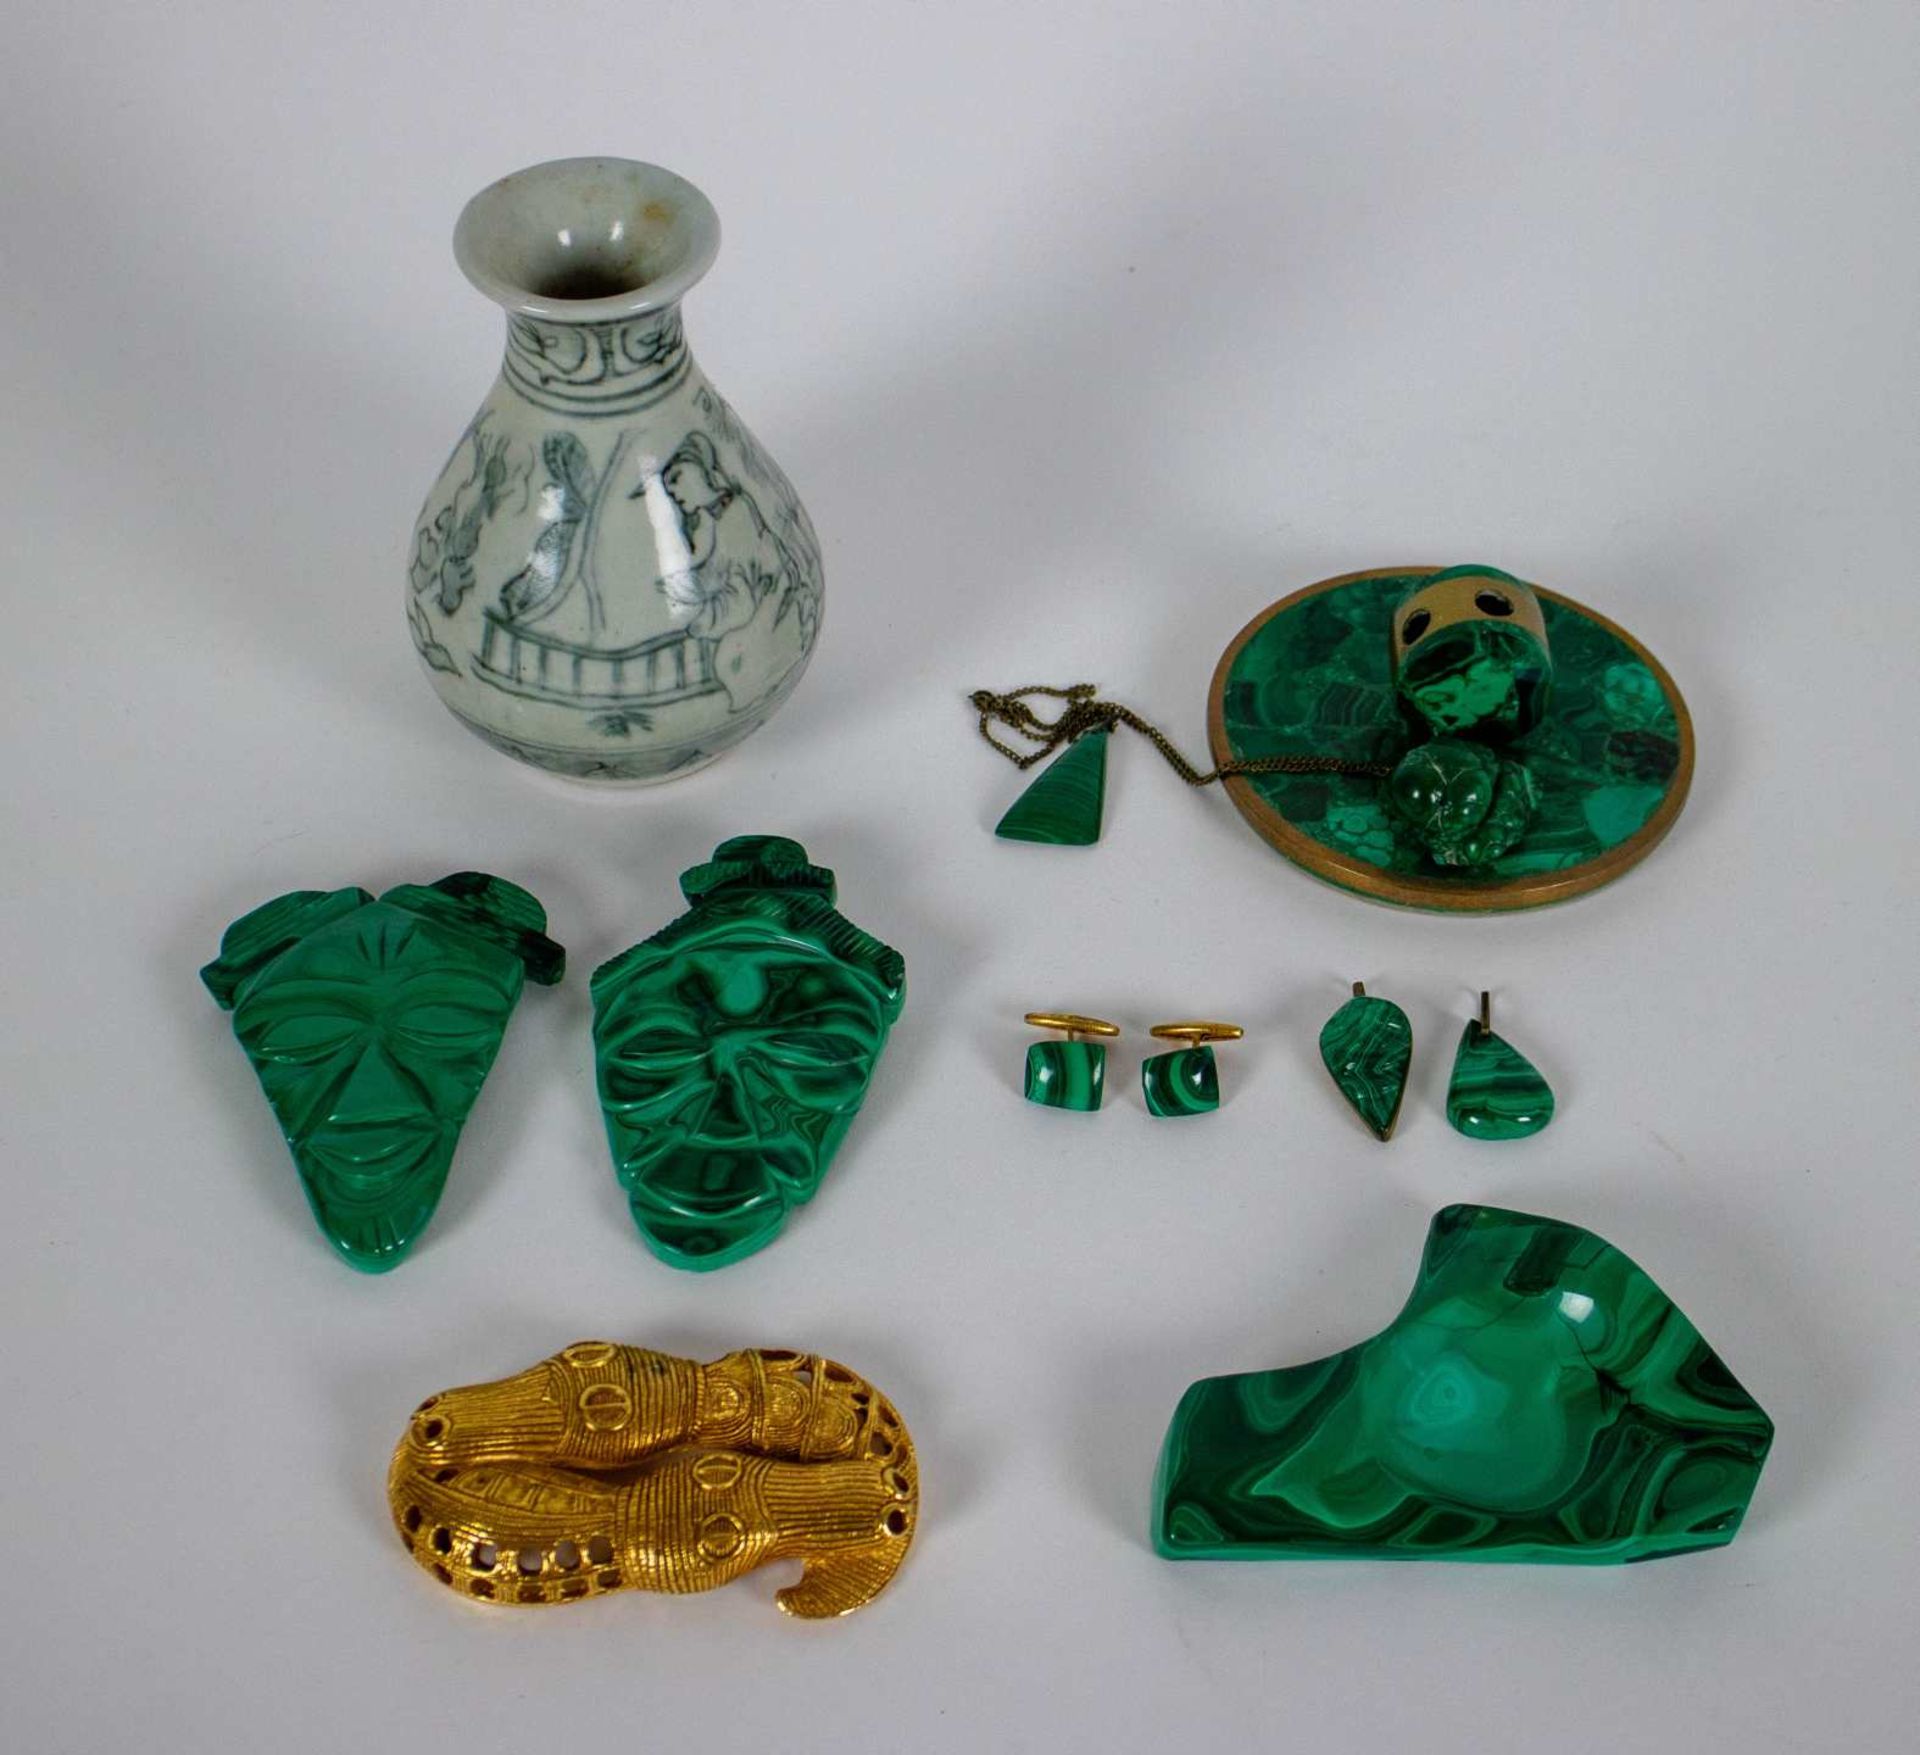 Lot with a Korean vase and malachite items